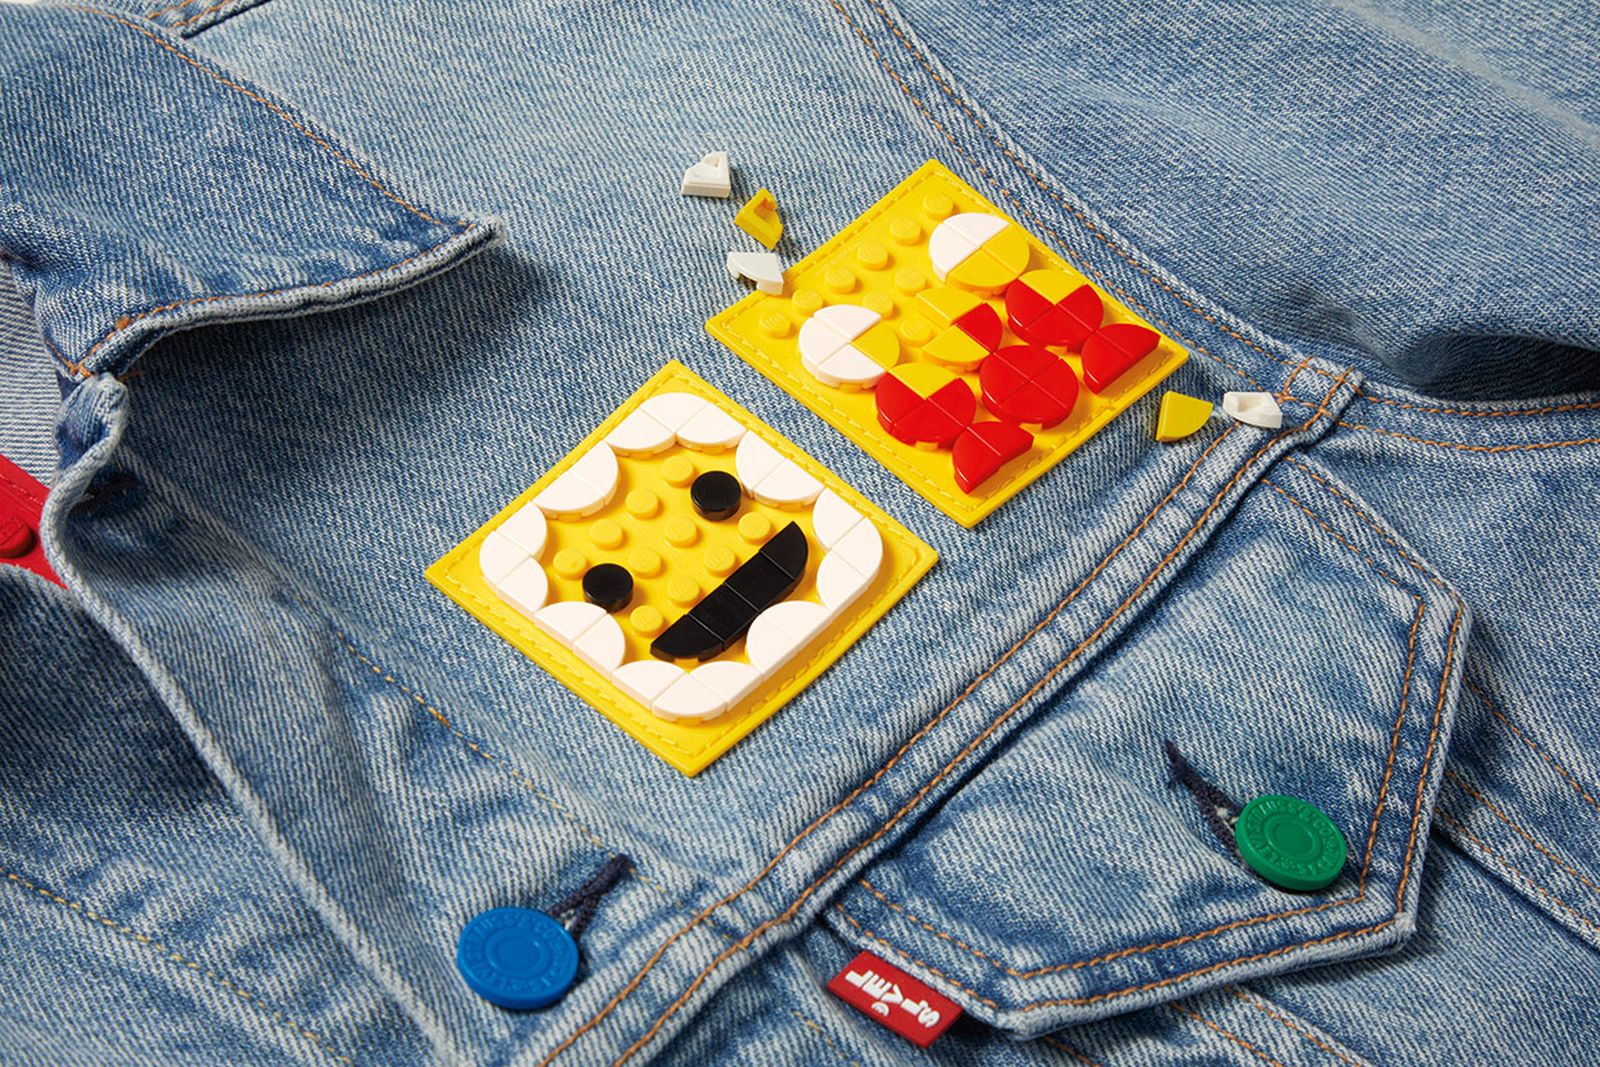 Levi's Just Traded Its Iconic Leather Patch for LEGO